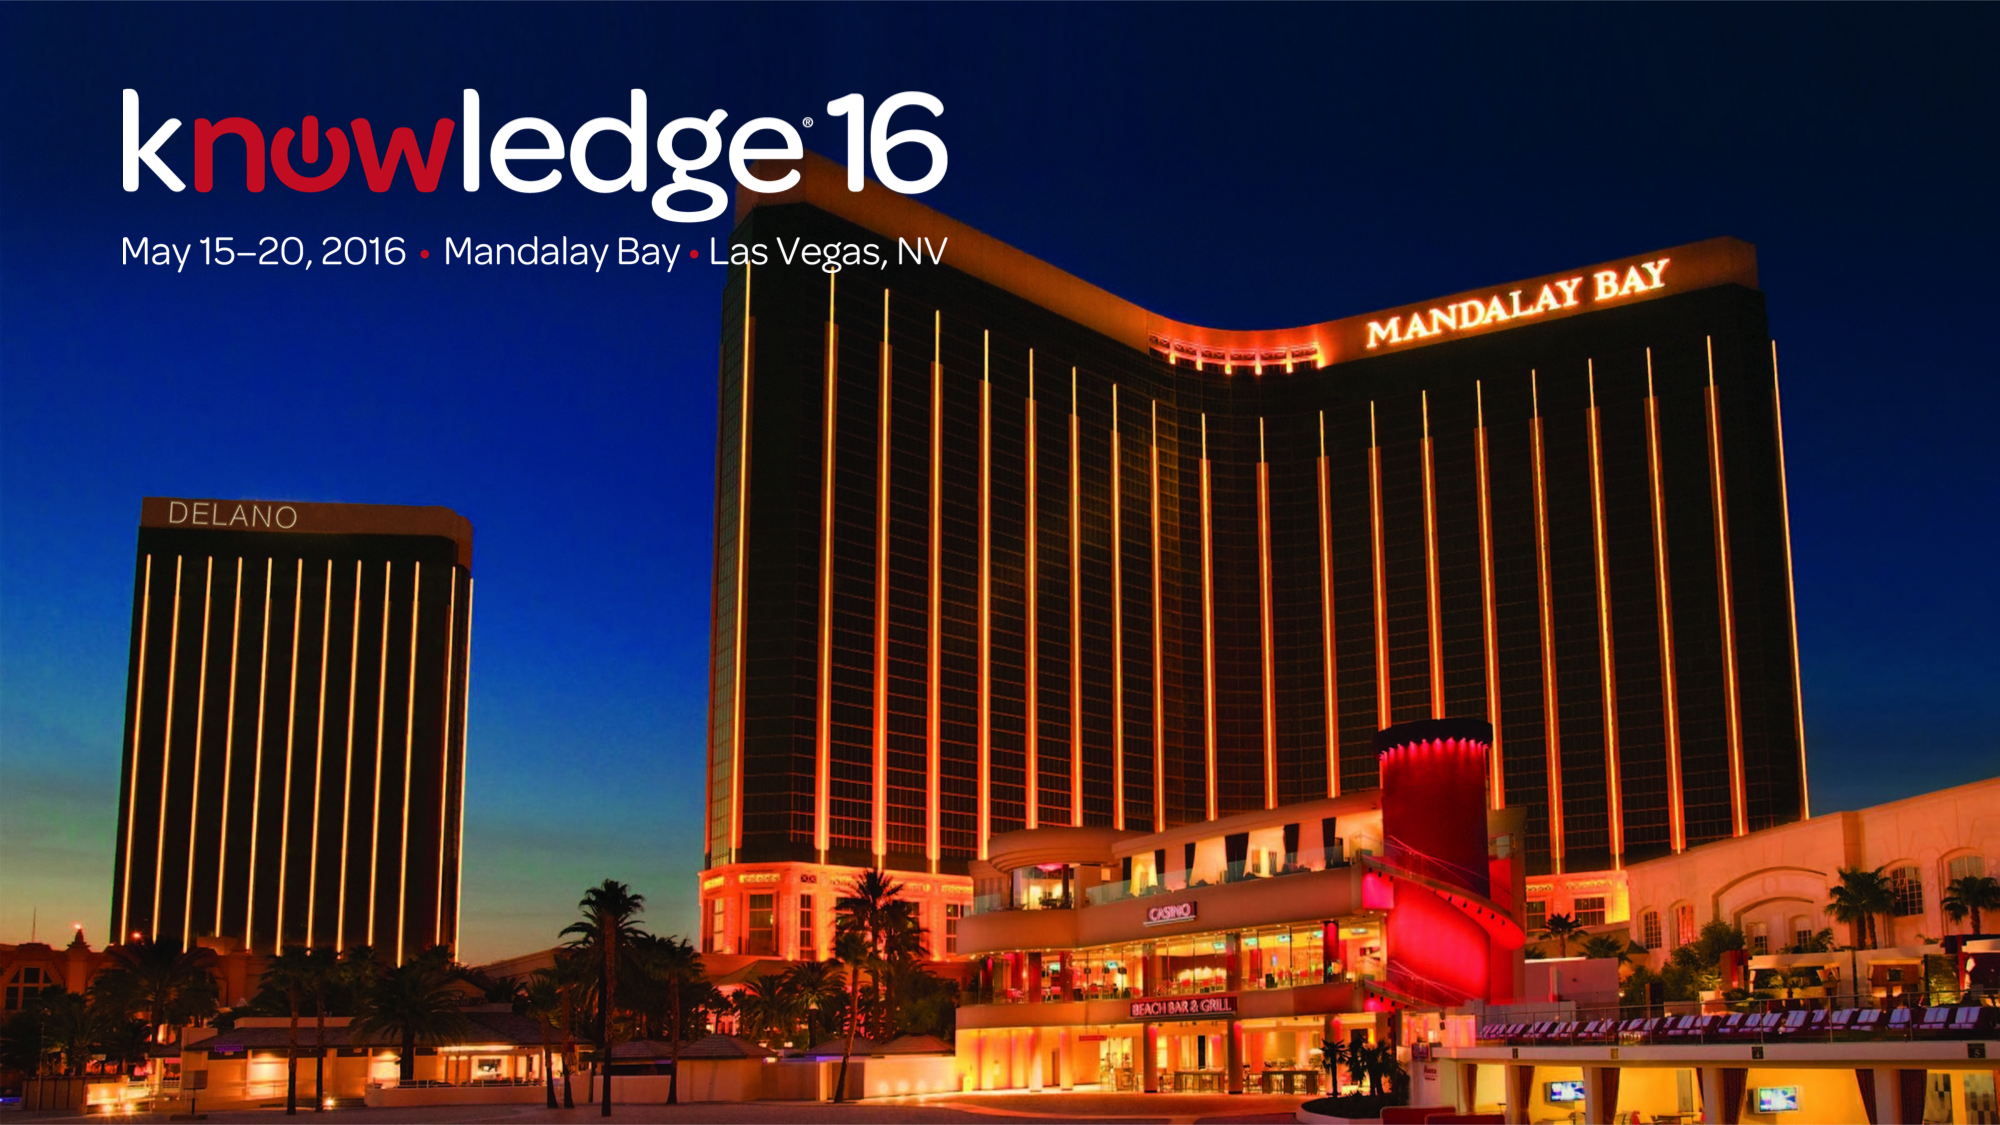 Are you ready to join the service revolution? Meet 3CLogic at Knowledge16